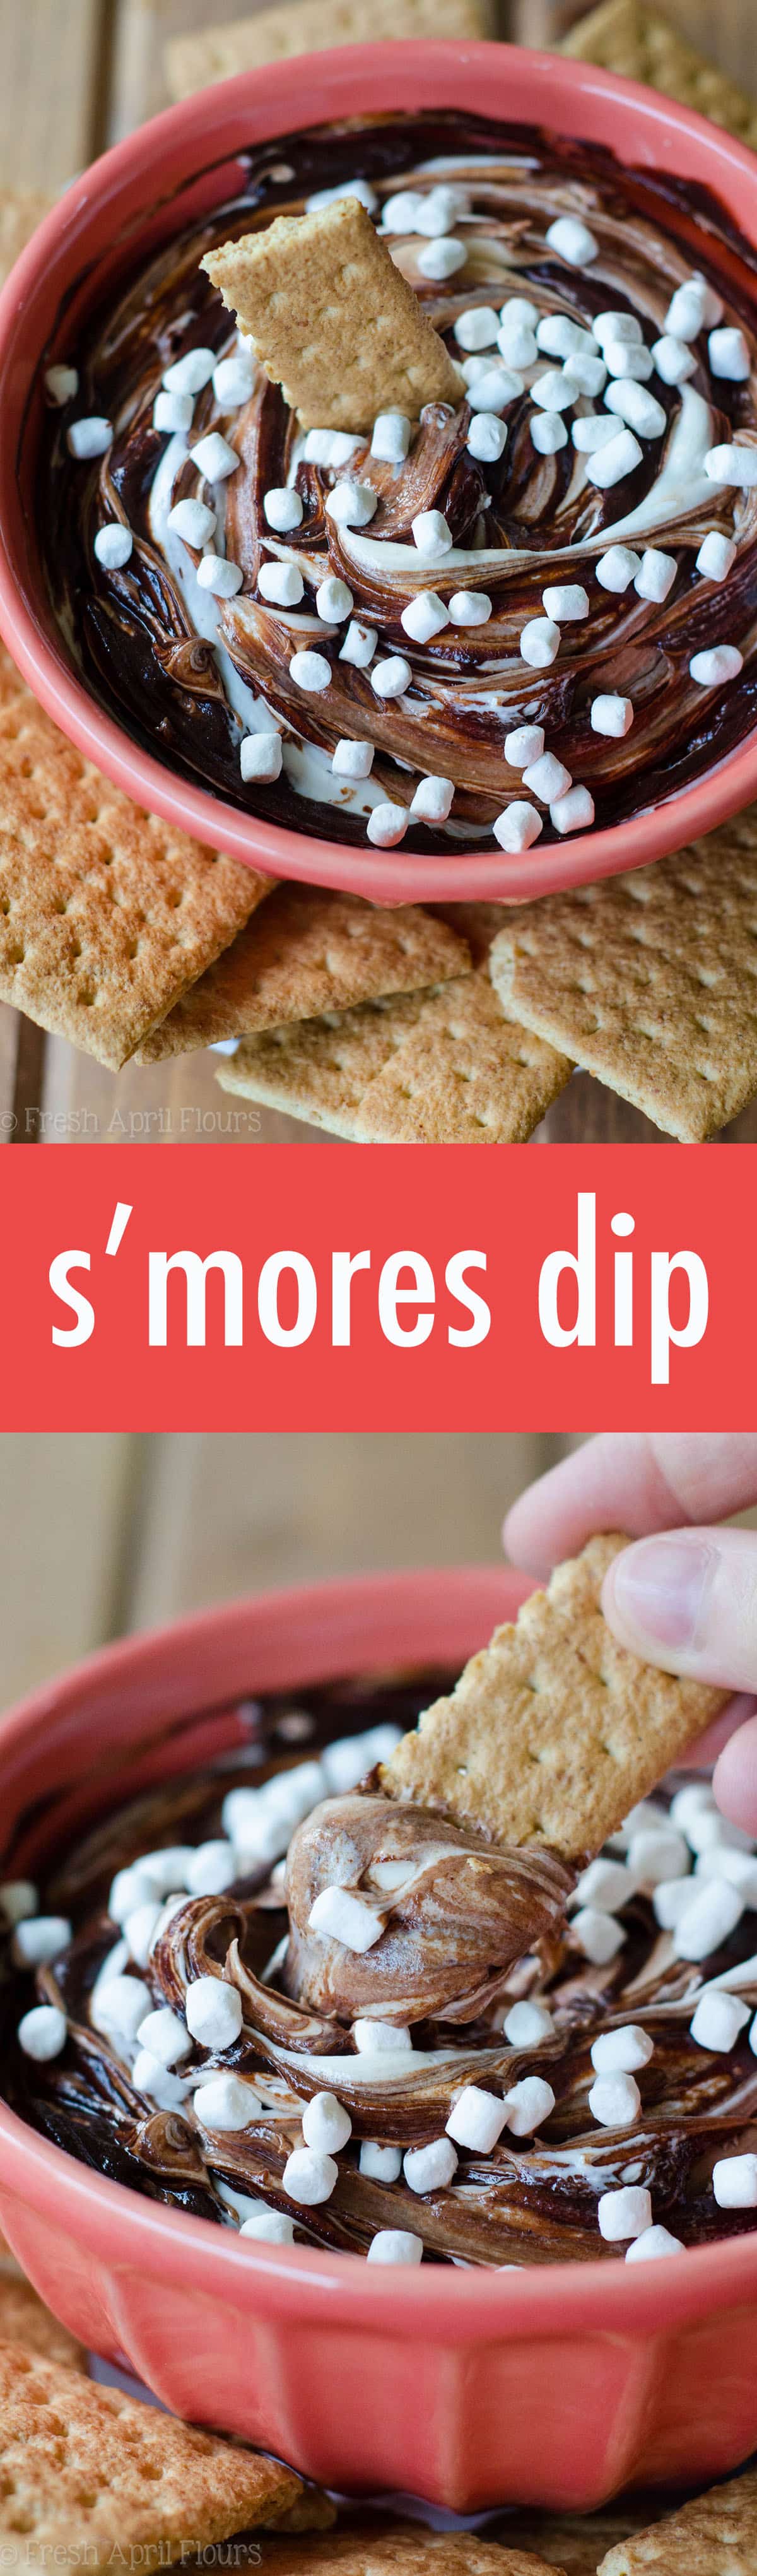 S'mores Dip: An easy gluten free dip made with marshmallow buttercream swirled with chocolate ganache. Serve with graham crackers or your favorite crunchy dipper and have the taste of summer all year long! via @frshaprilflours